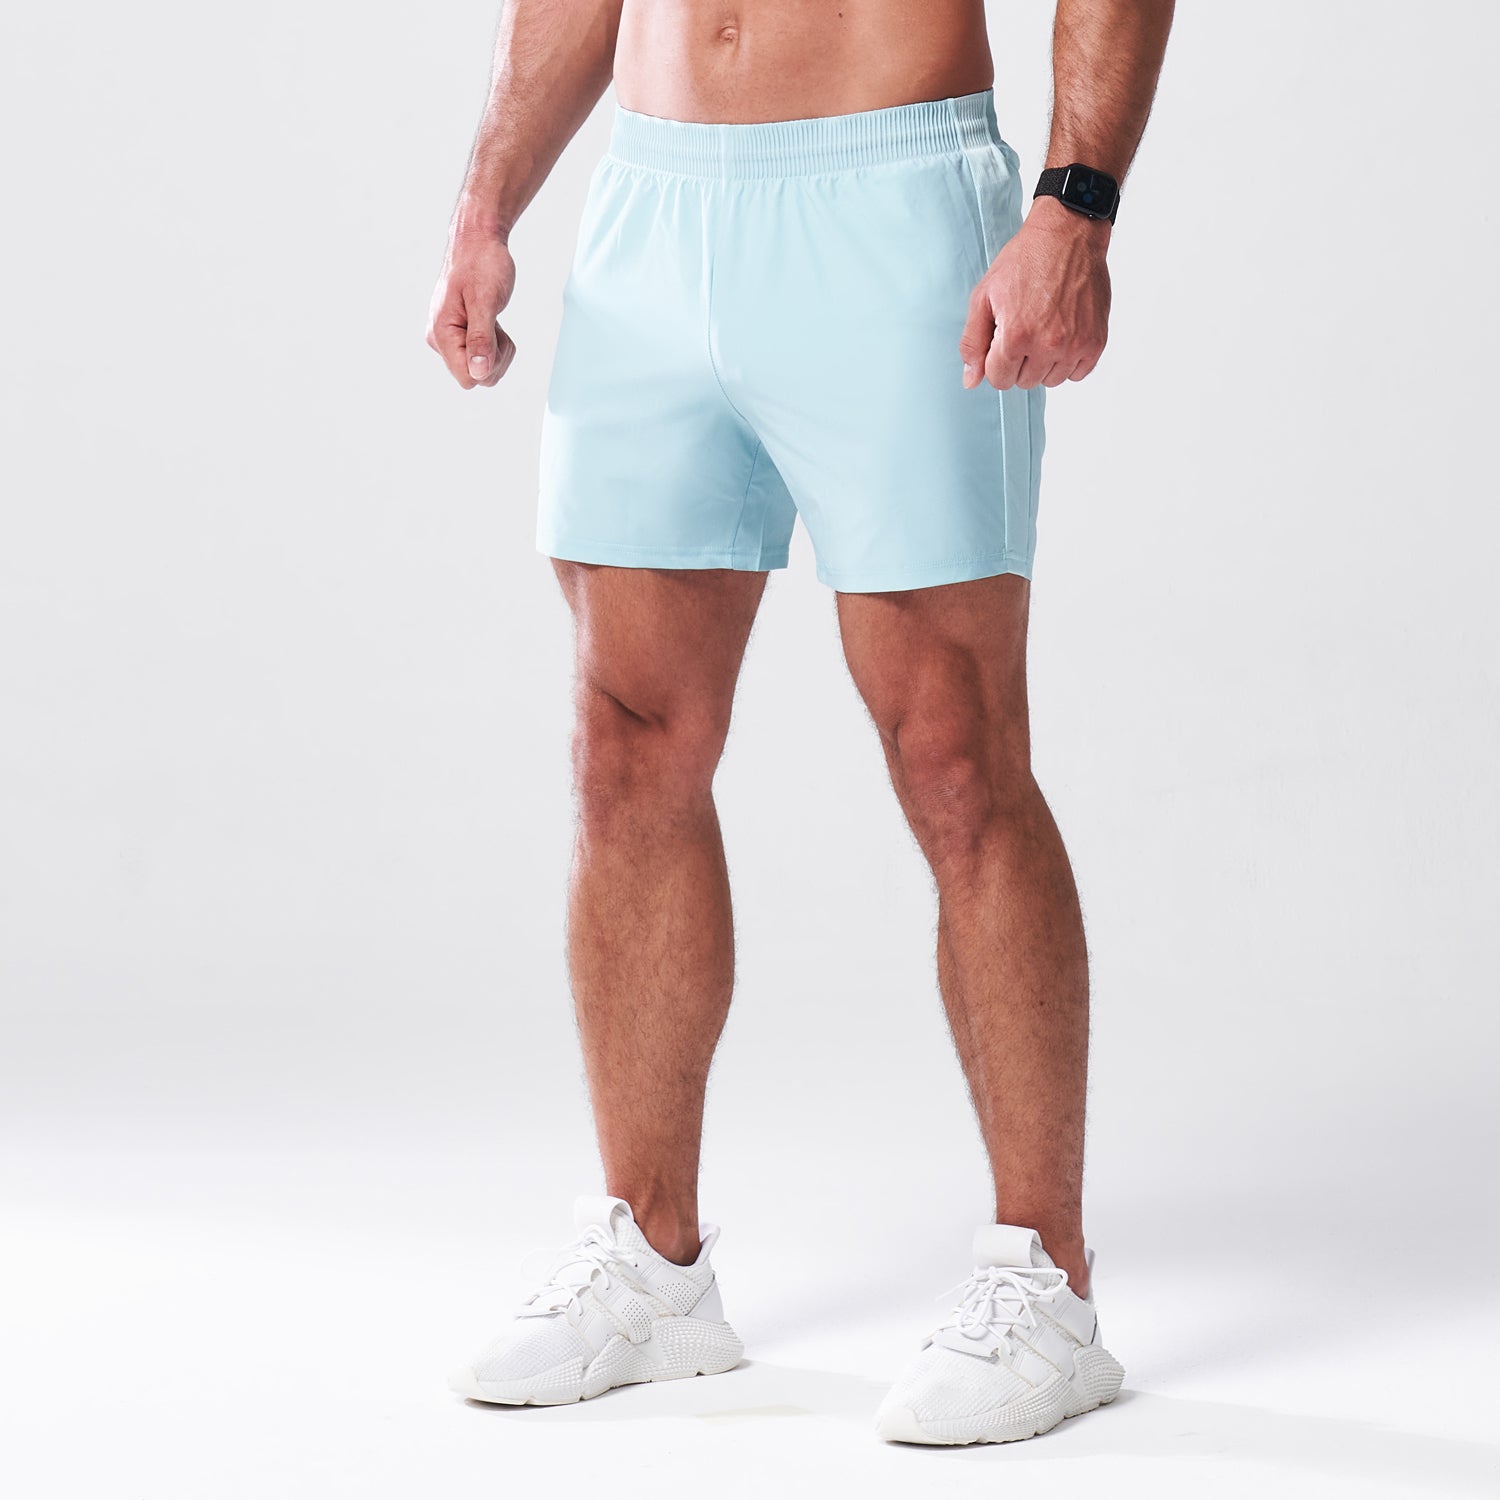 squatwolf-gym-wear-lab360-5-impact-shorts-canal-blue-workout-short-for-men